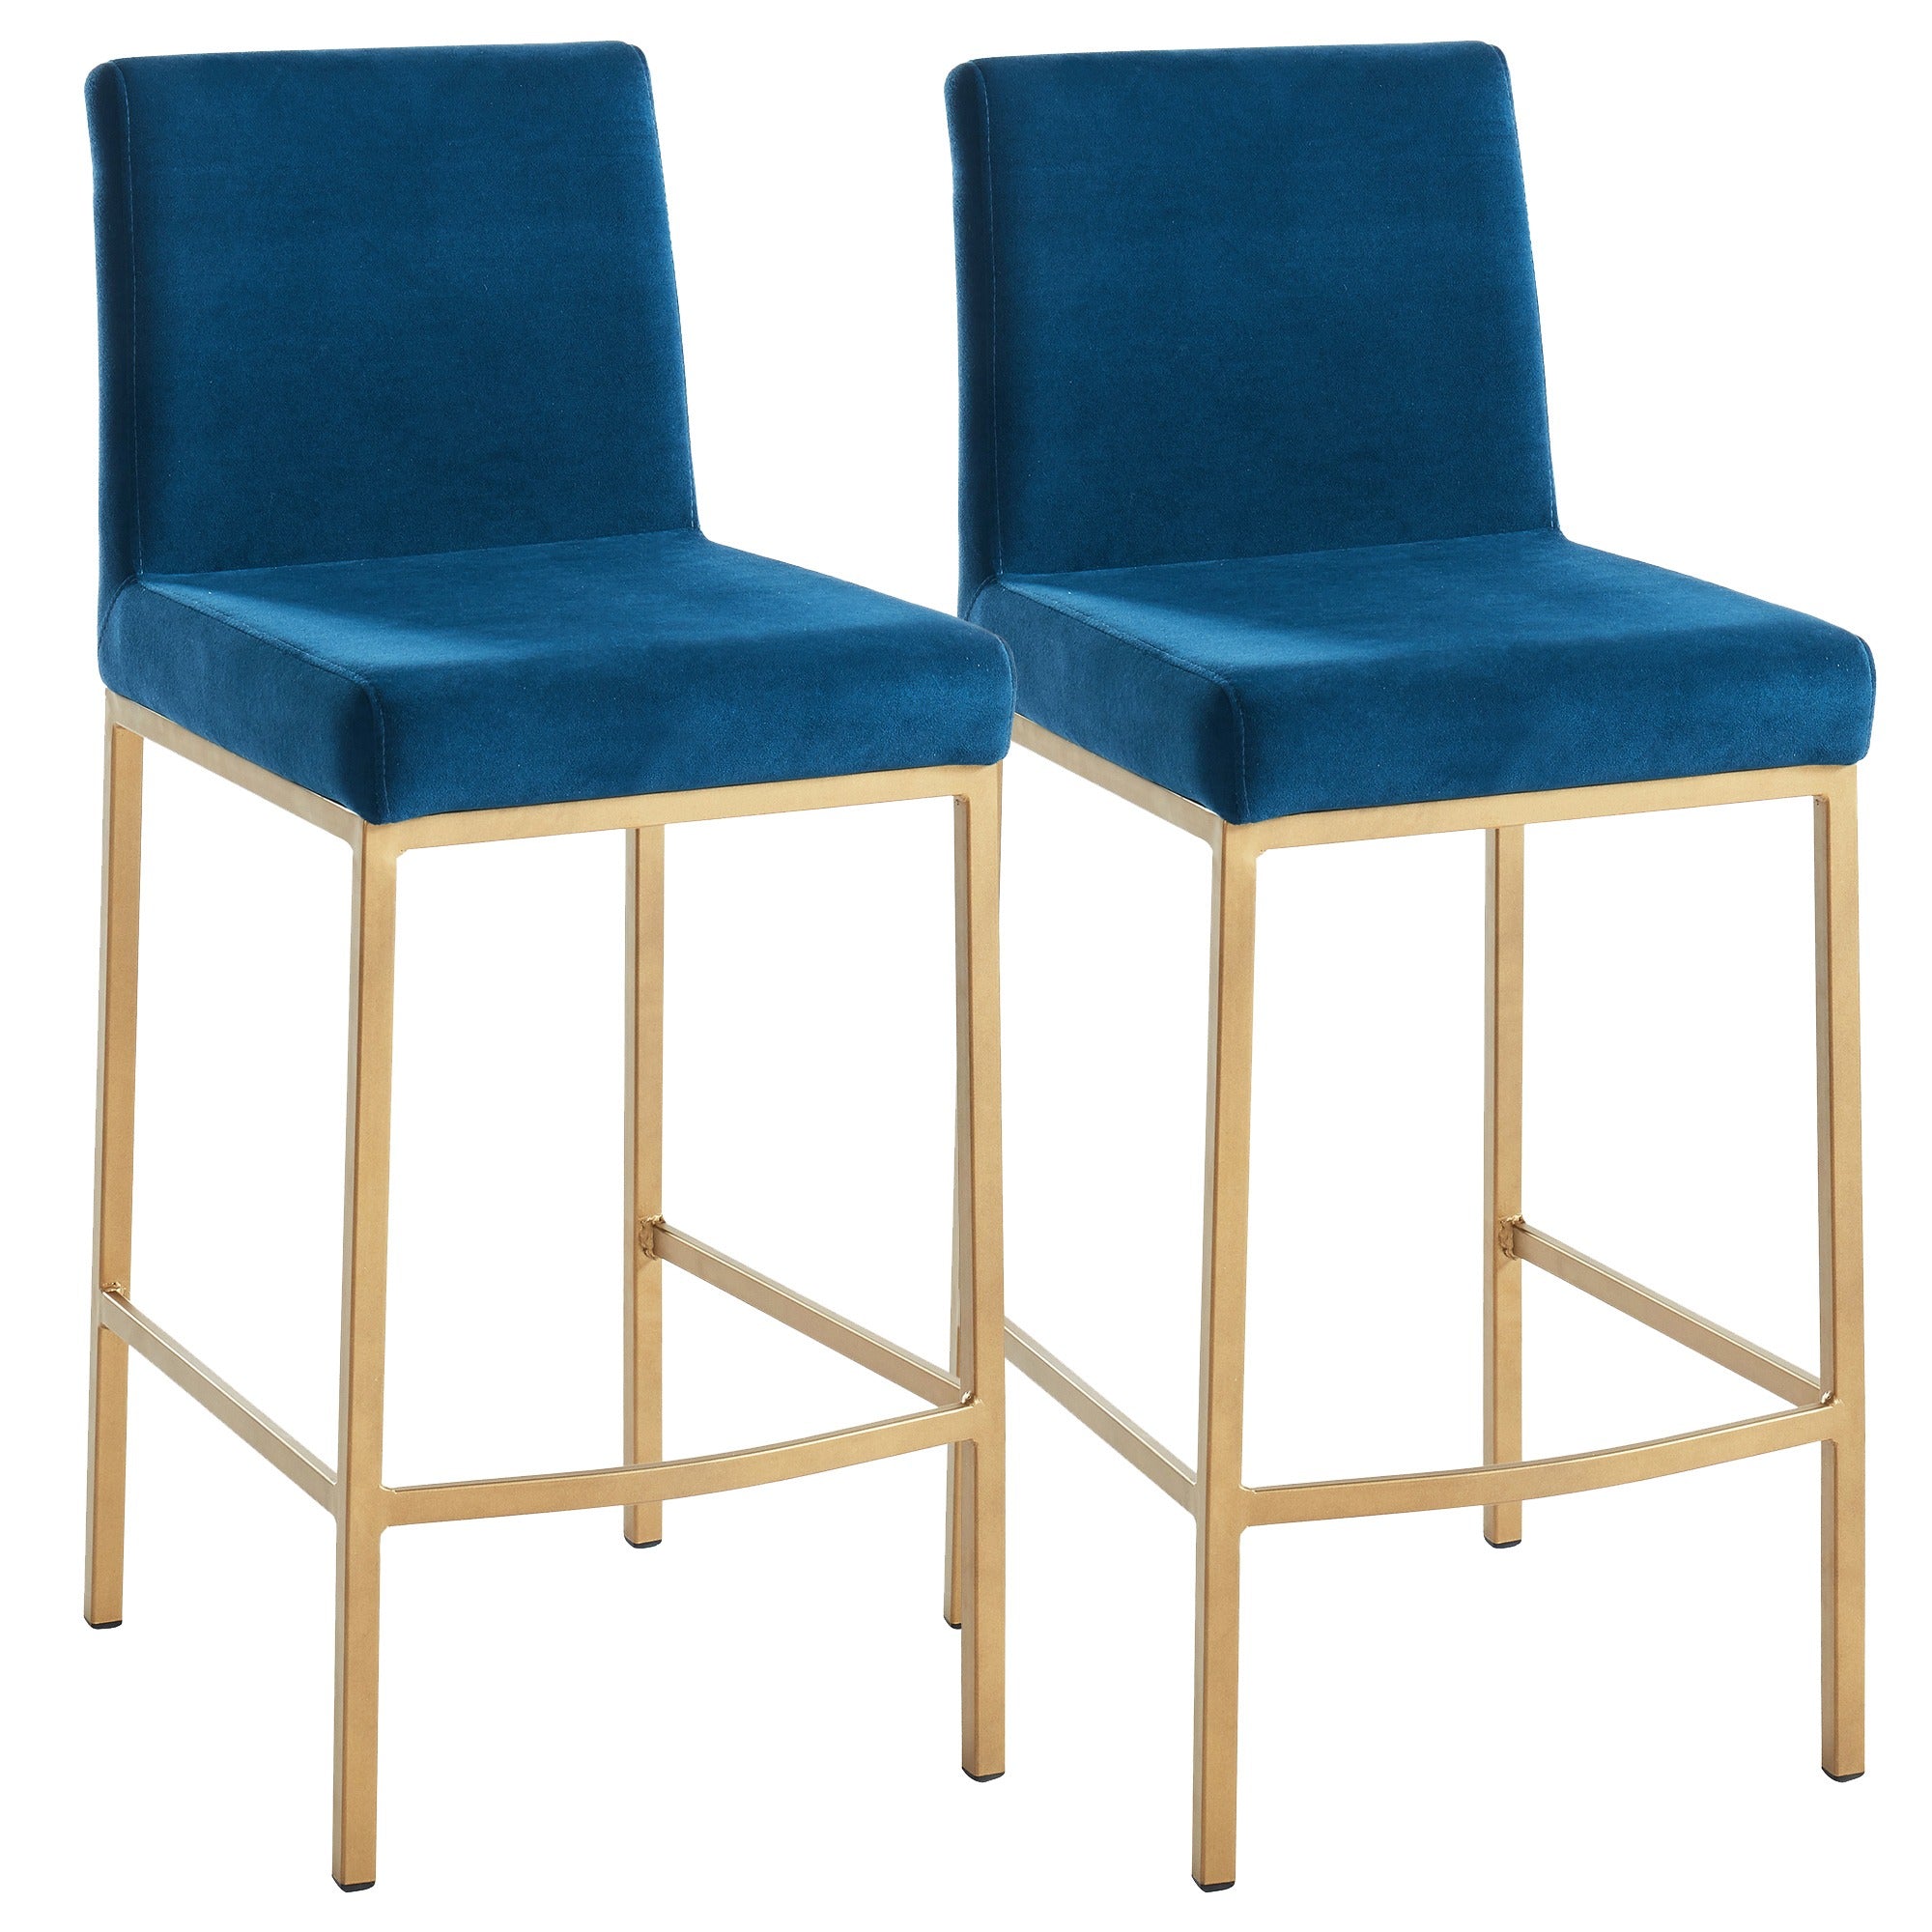 Diego-26" Counter Stool-Grey/Aged Gold, Set of 2